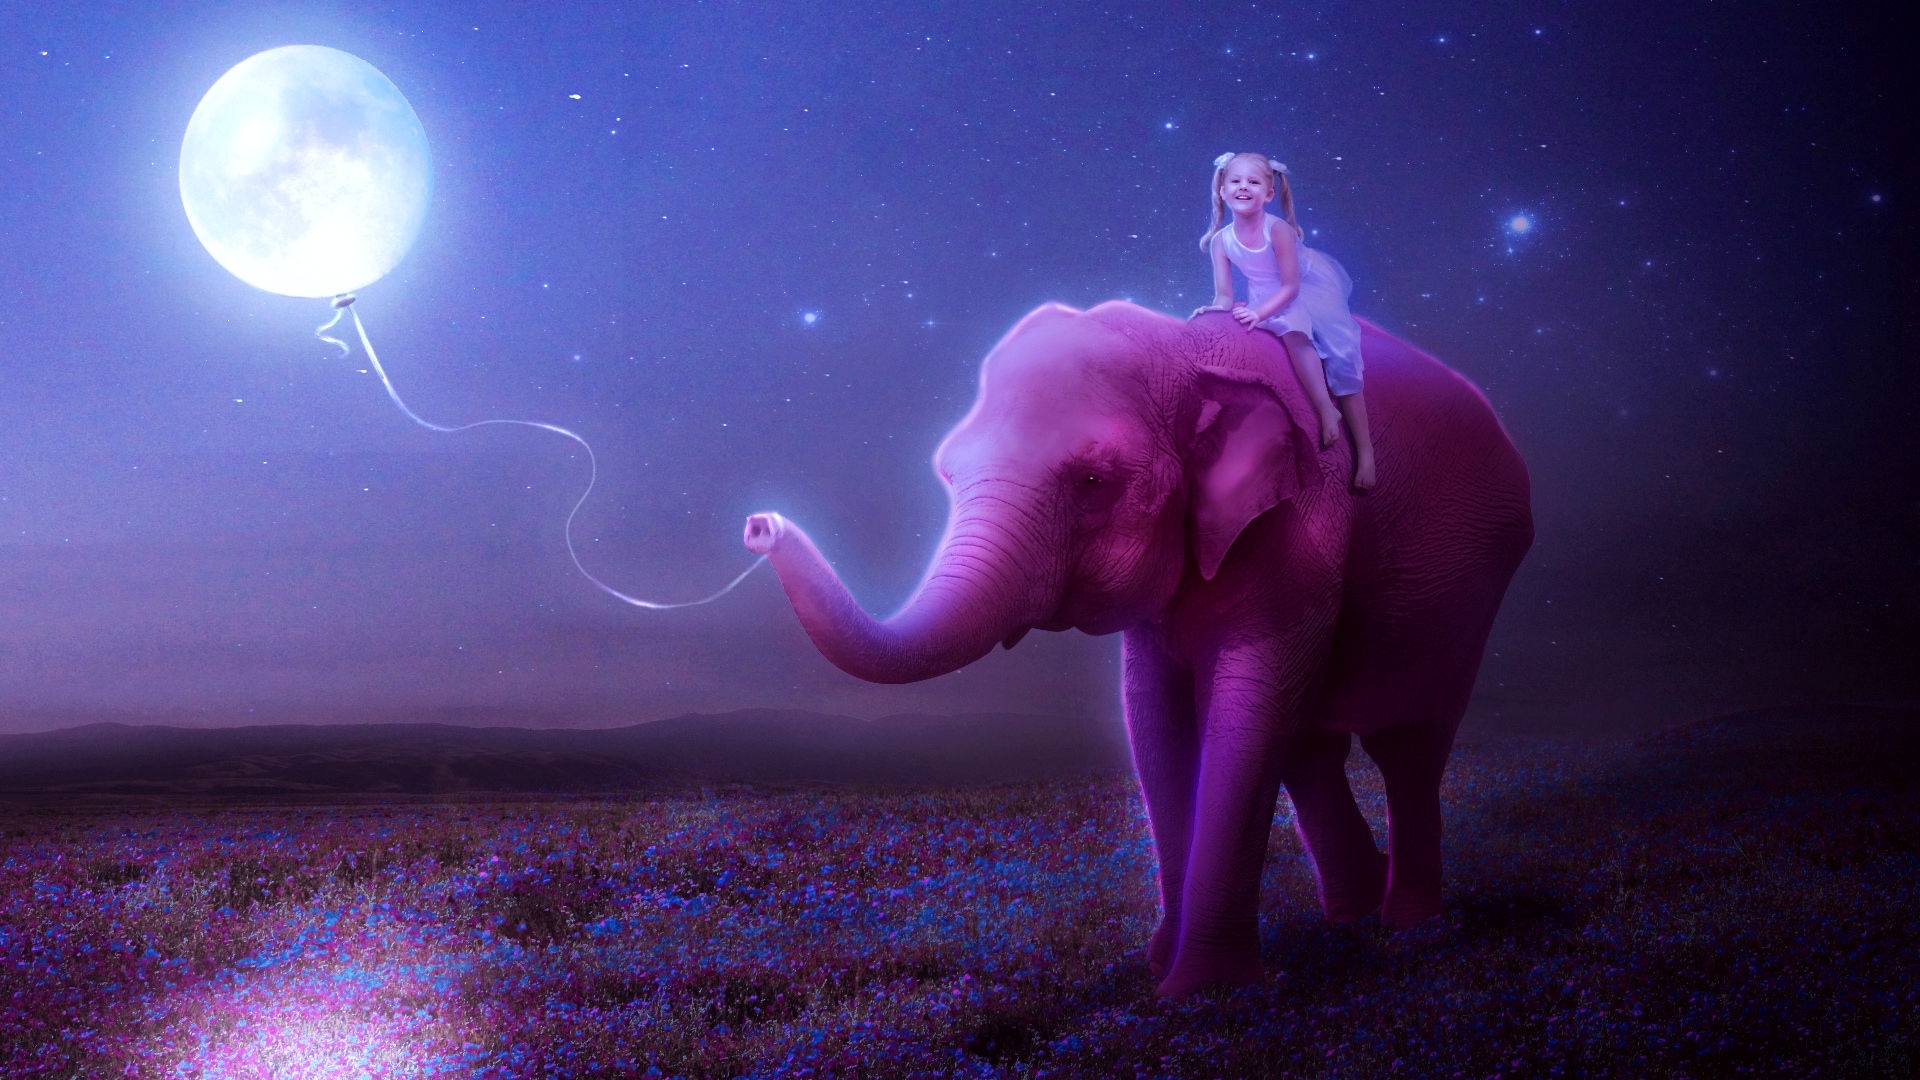 Pink Elephant Photos Download - Little Girl With Elephant , HD Wallpaper & Backgrounds